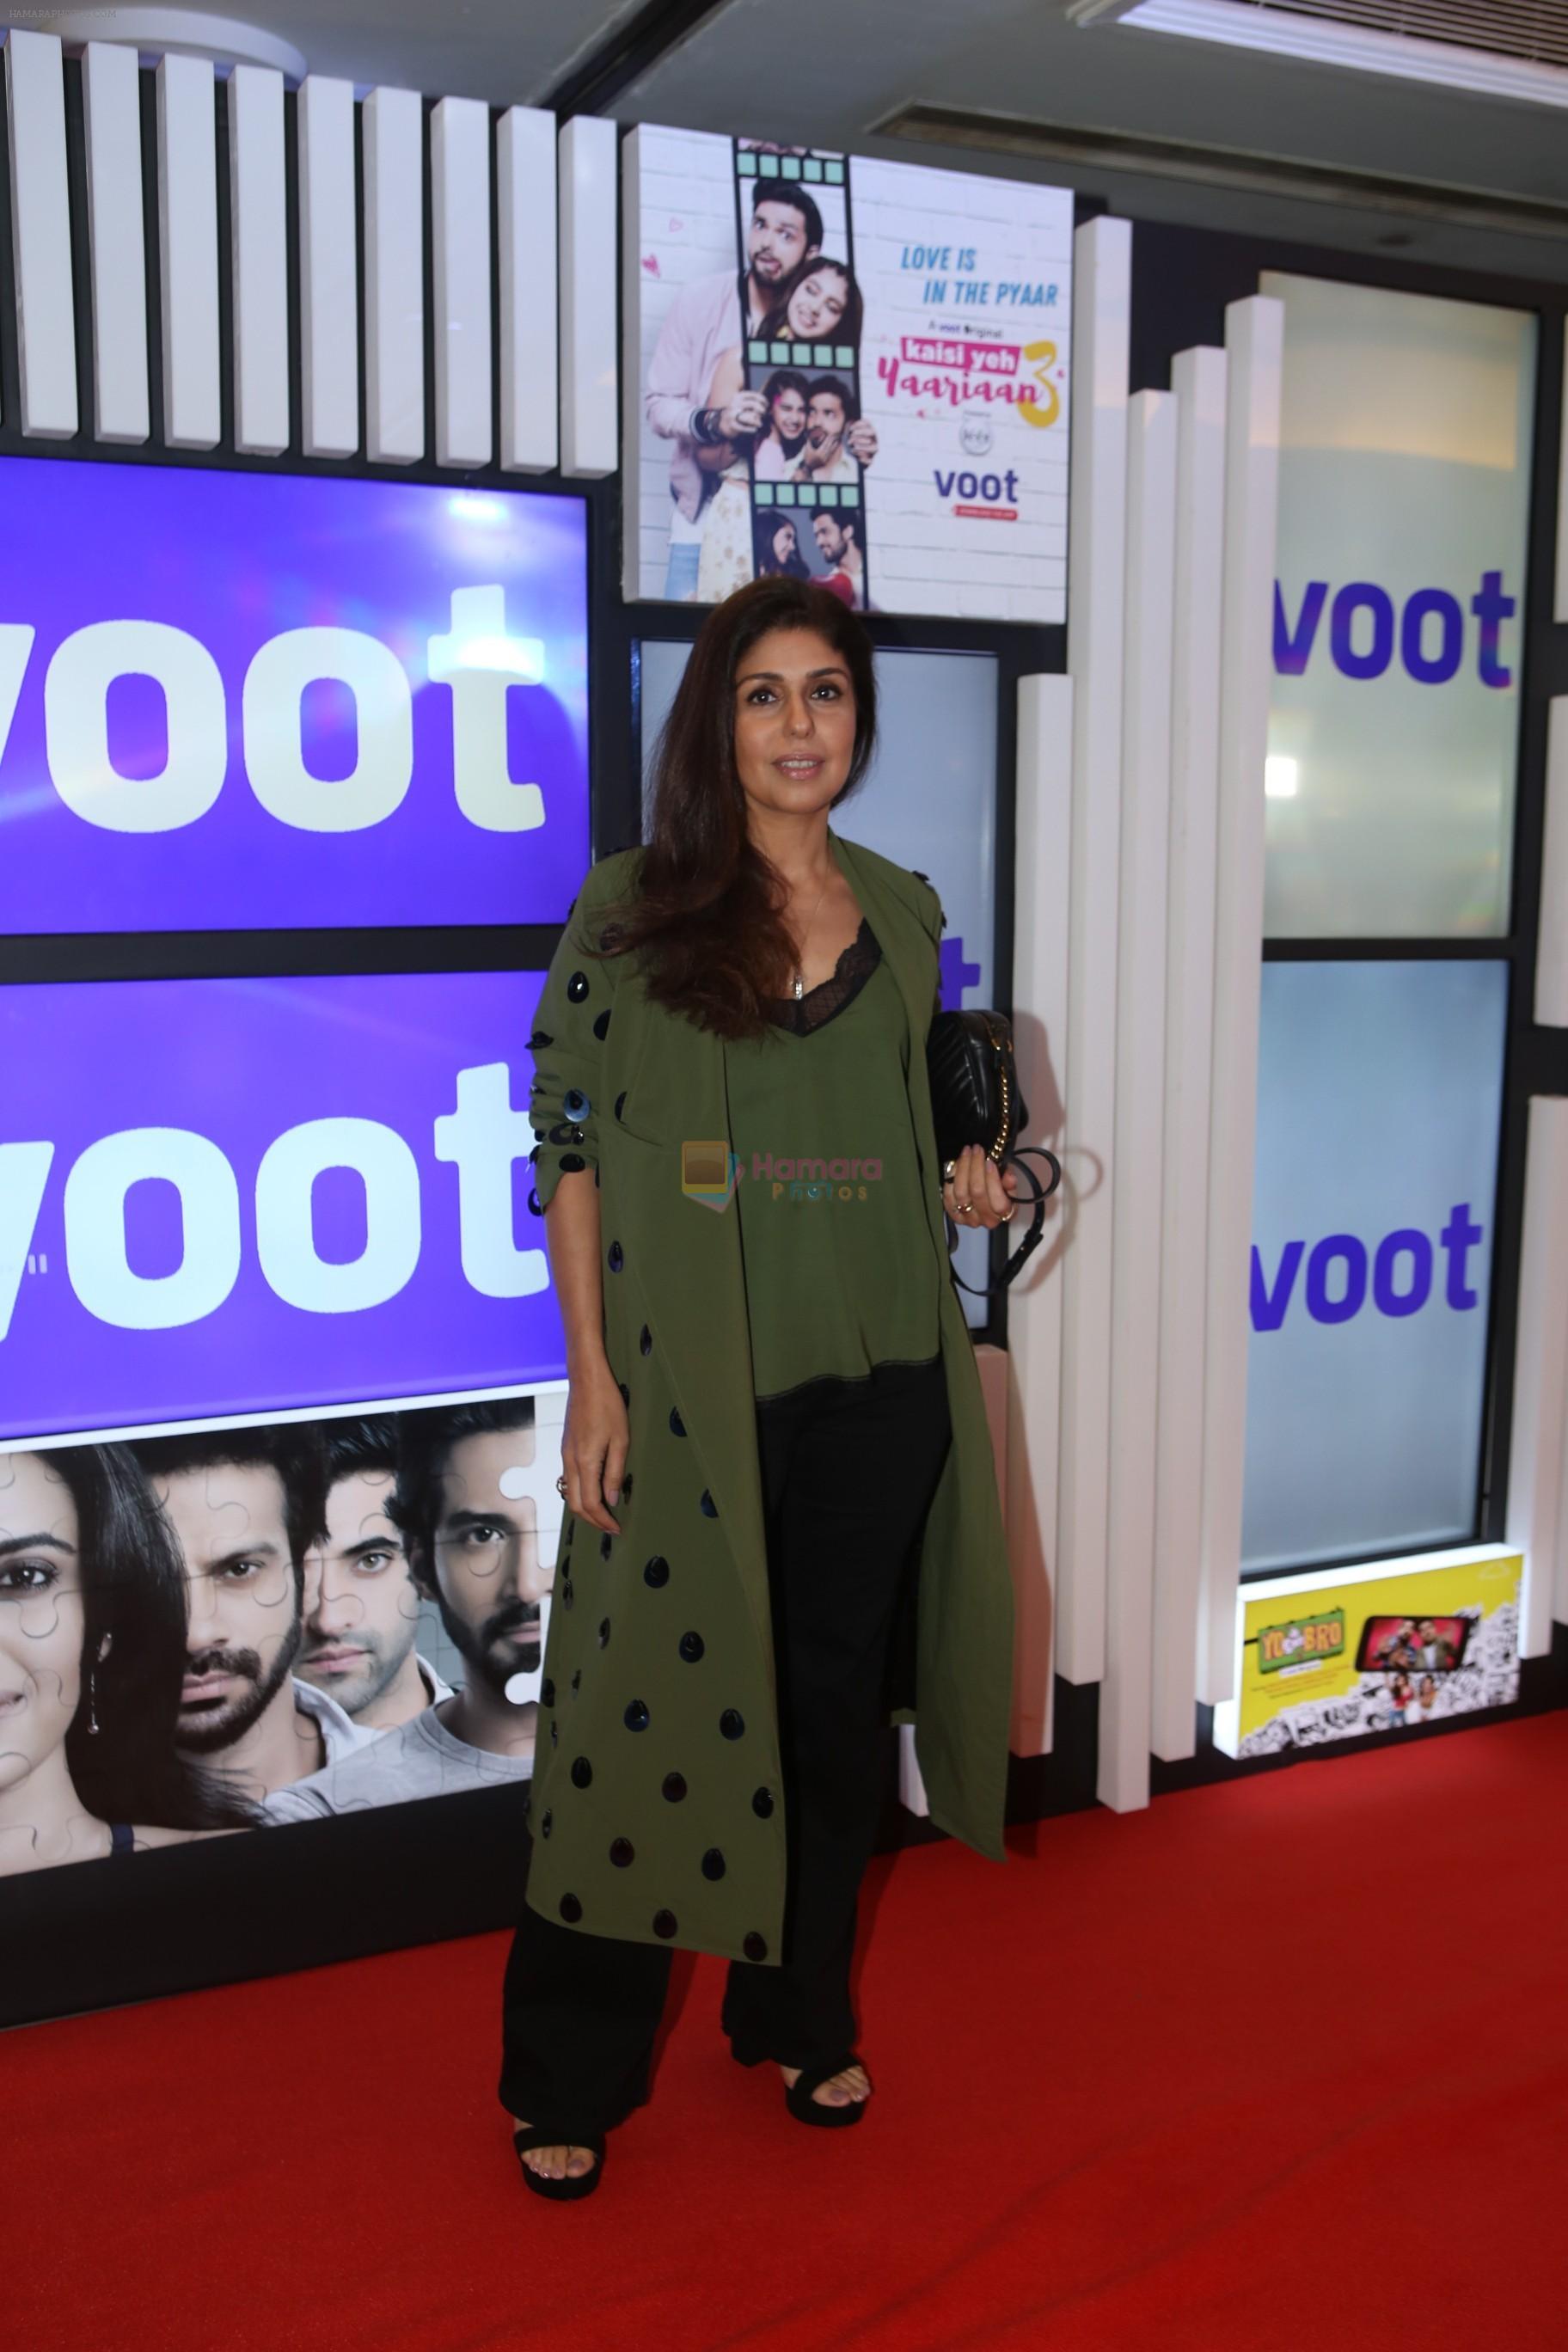 at Voot press conference in ITC Grand Maratha in Andheri on 30th Aug 2018